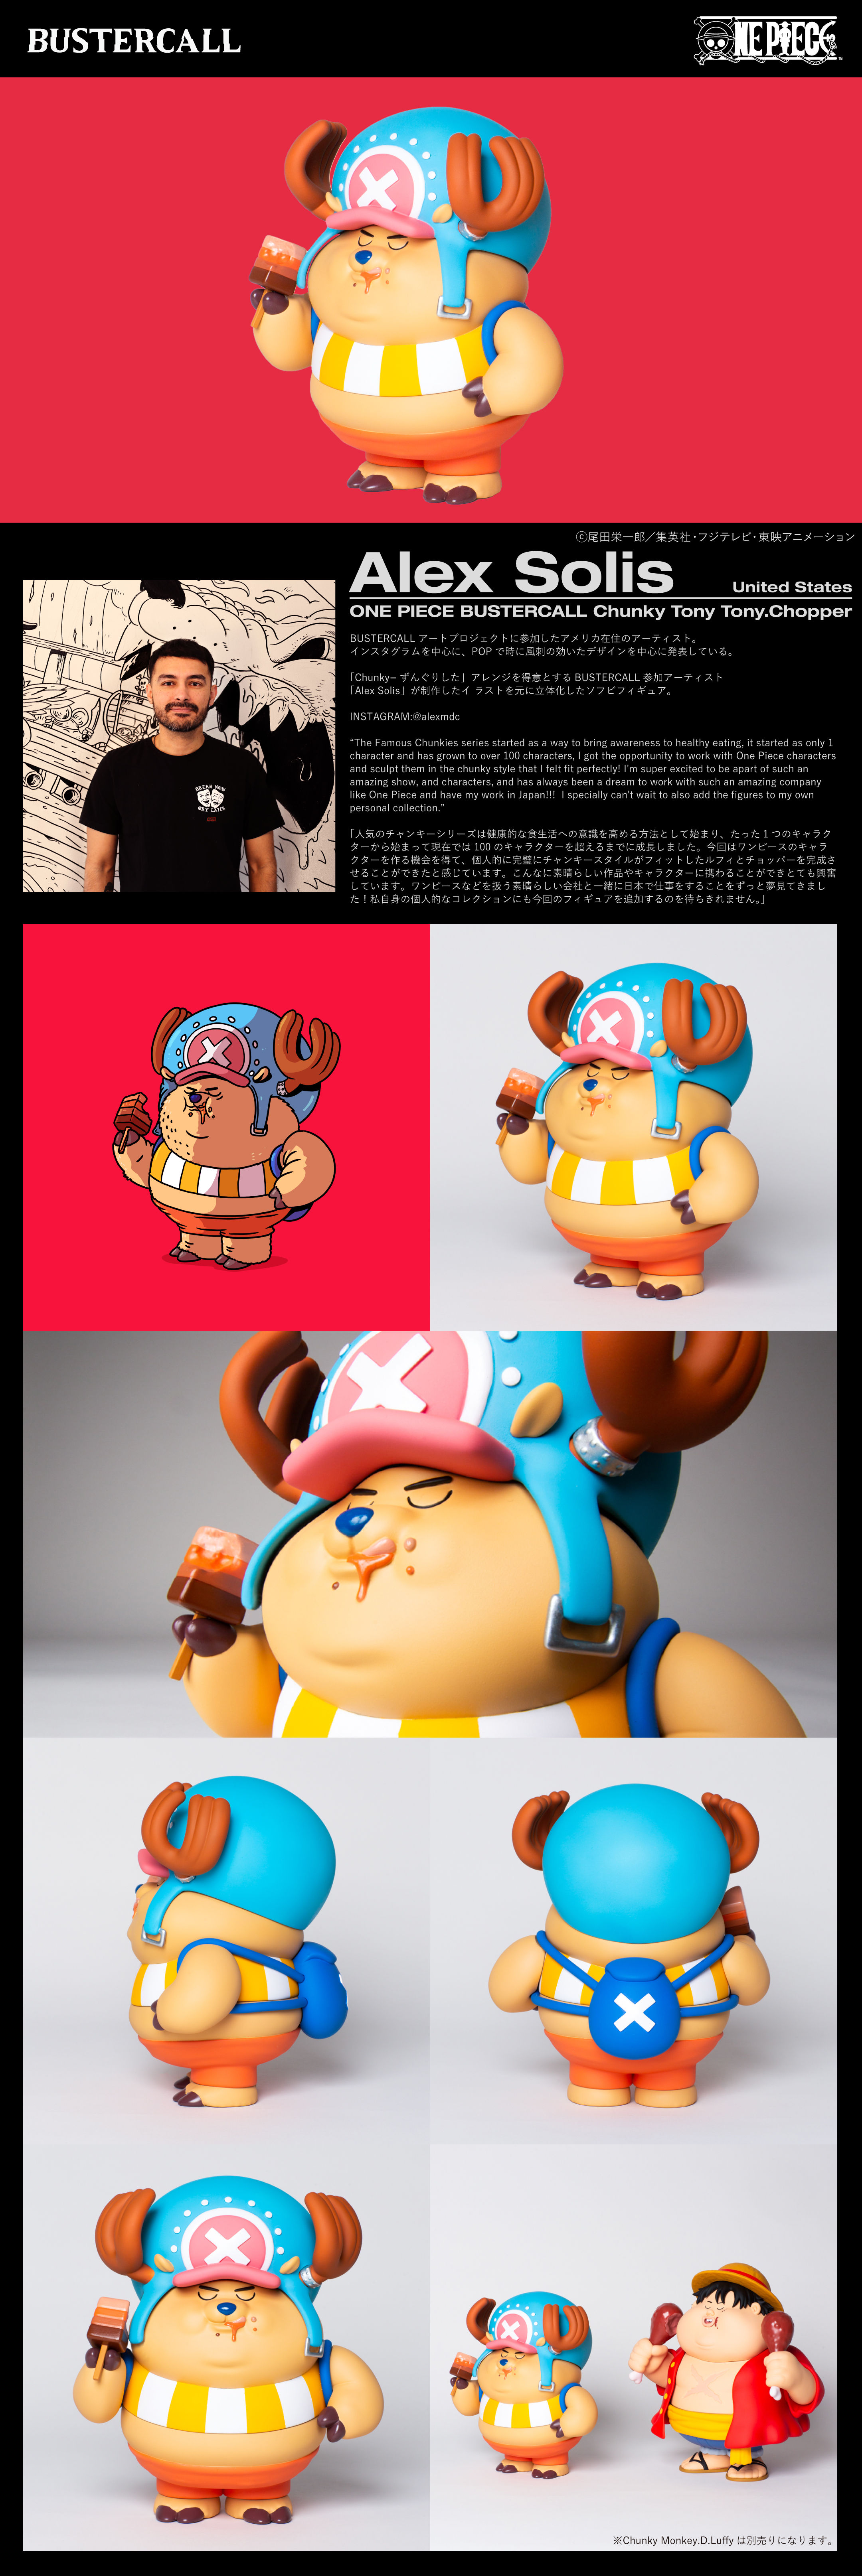 One Piece Bustercall Chunky Tony Tony Chopper One Piece Bustercall バンダイナムコグループ公式通販サイト